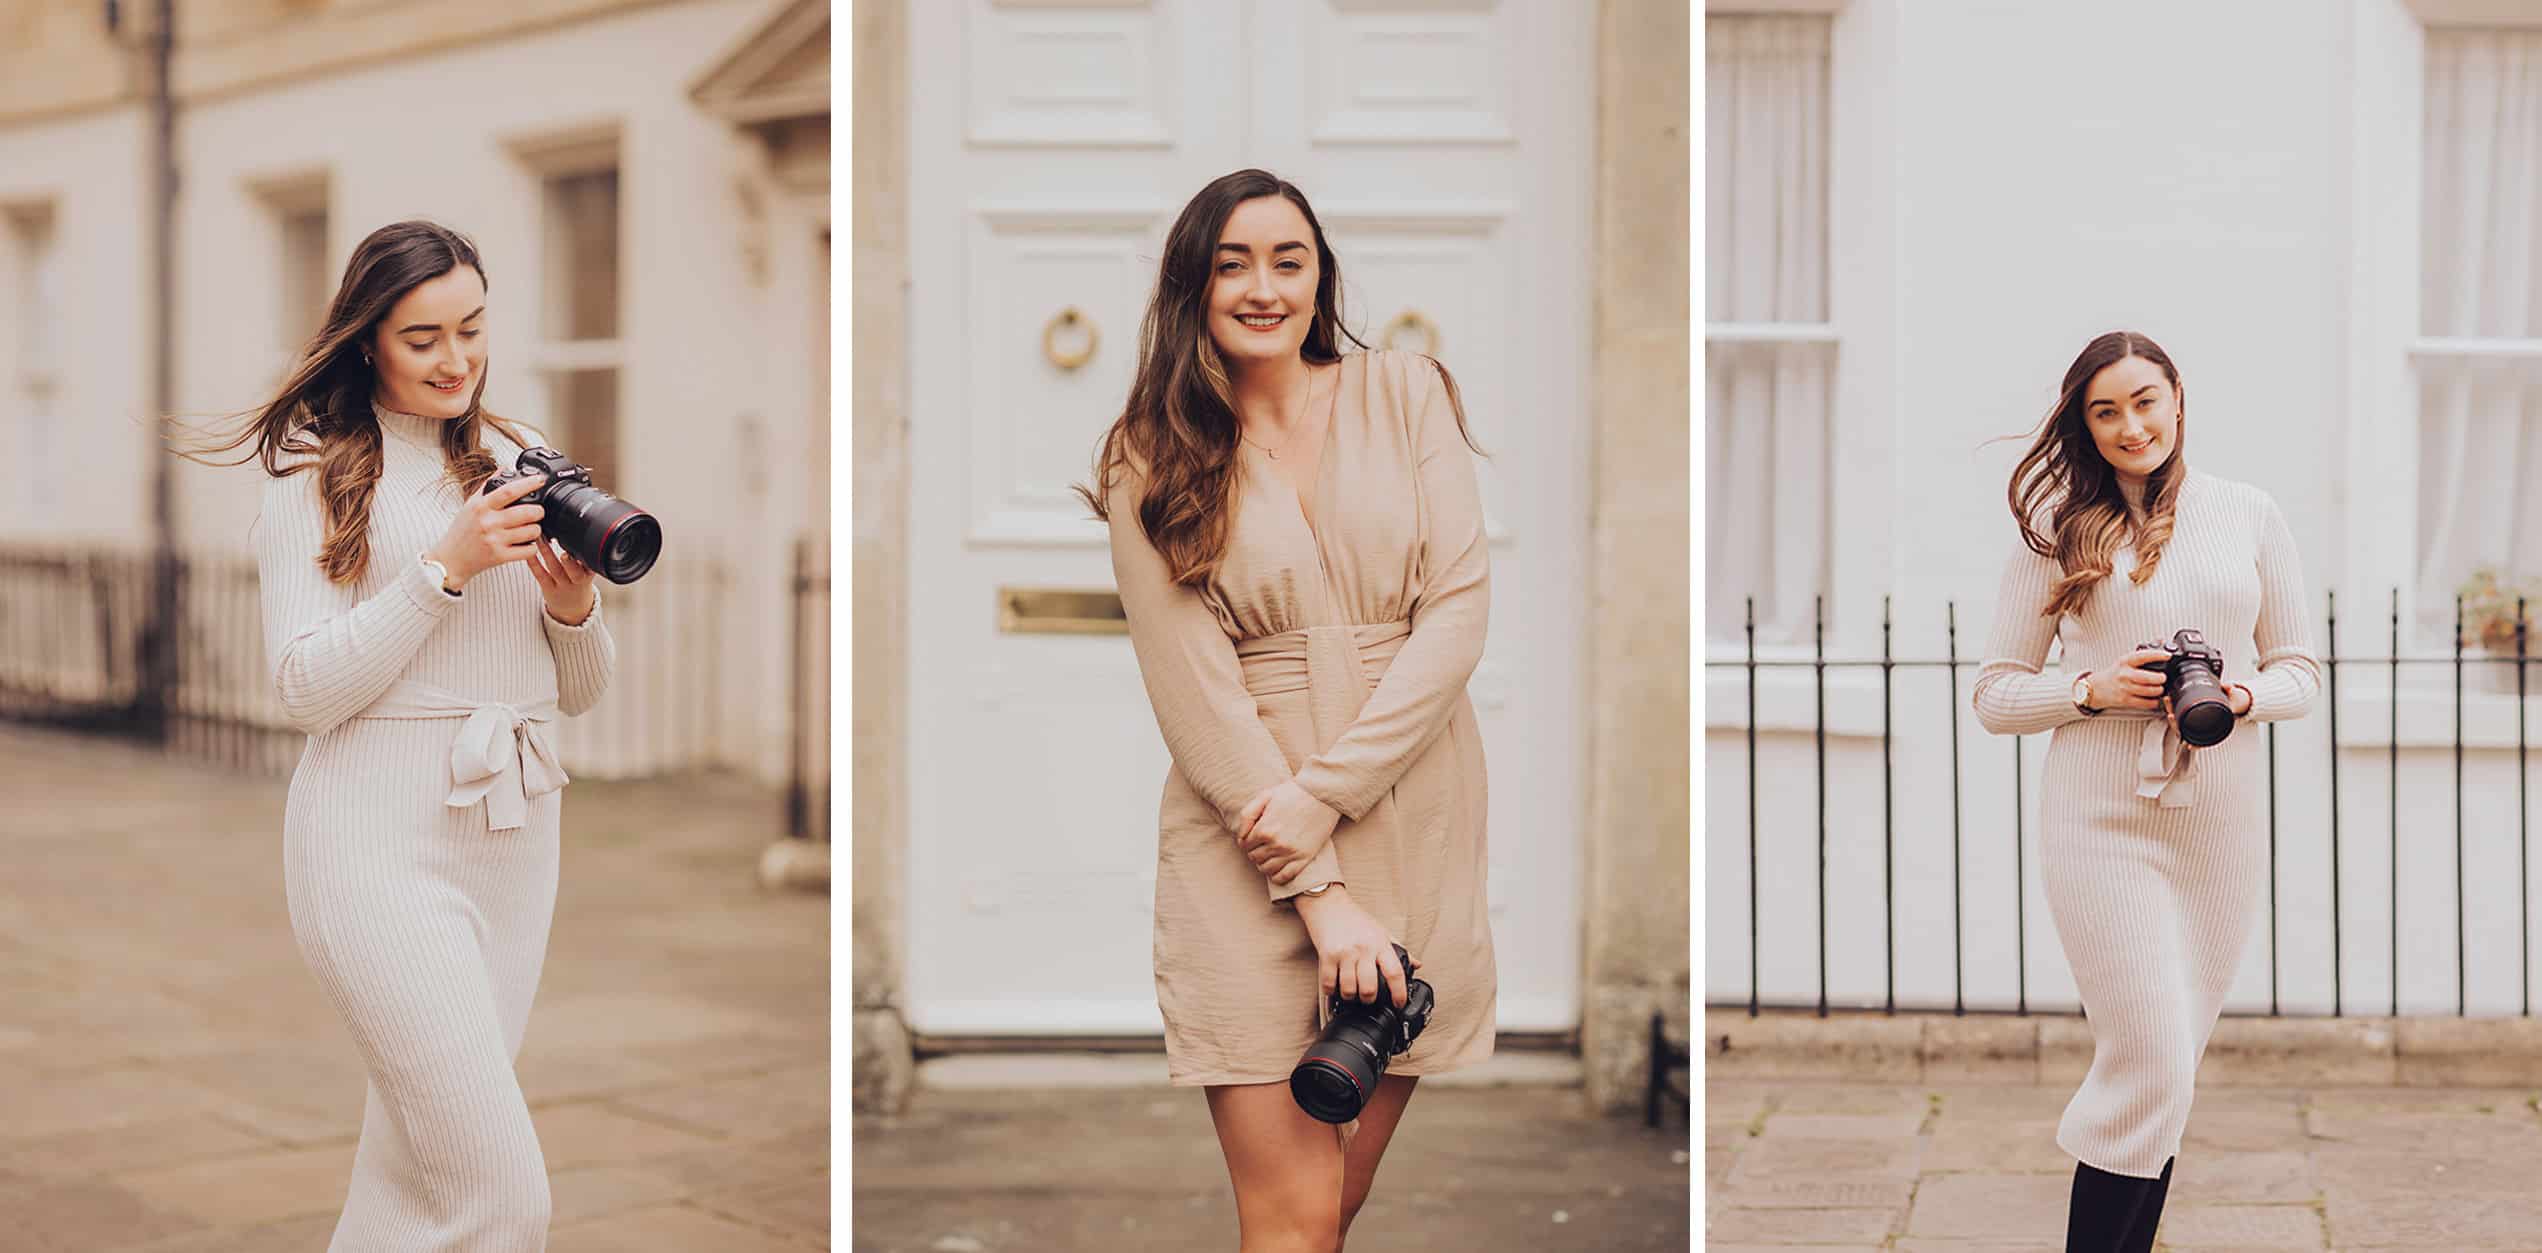 three image of Natasha from Honeydew Moments wearing light colourec clothes and holding her camera around Bath's city streets